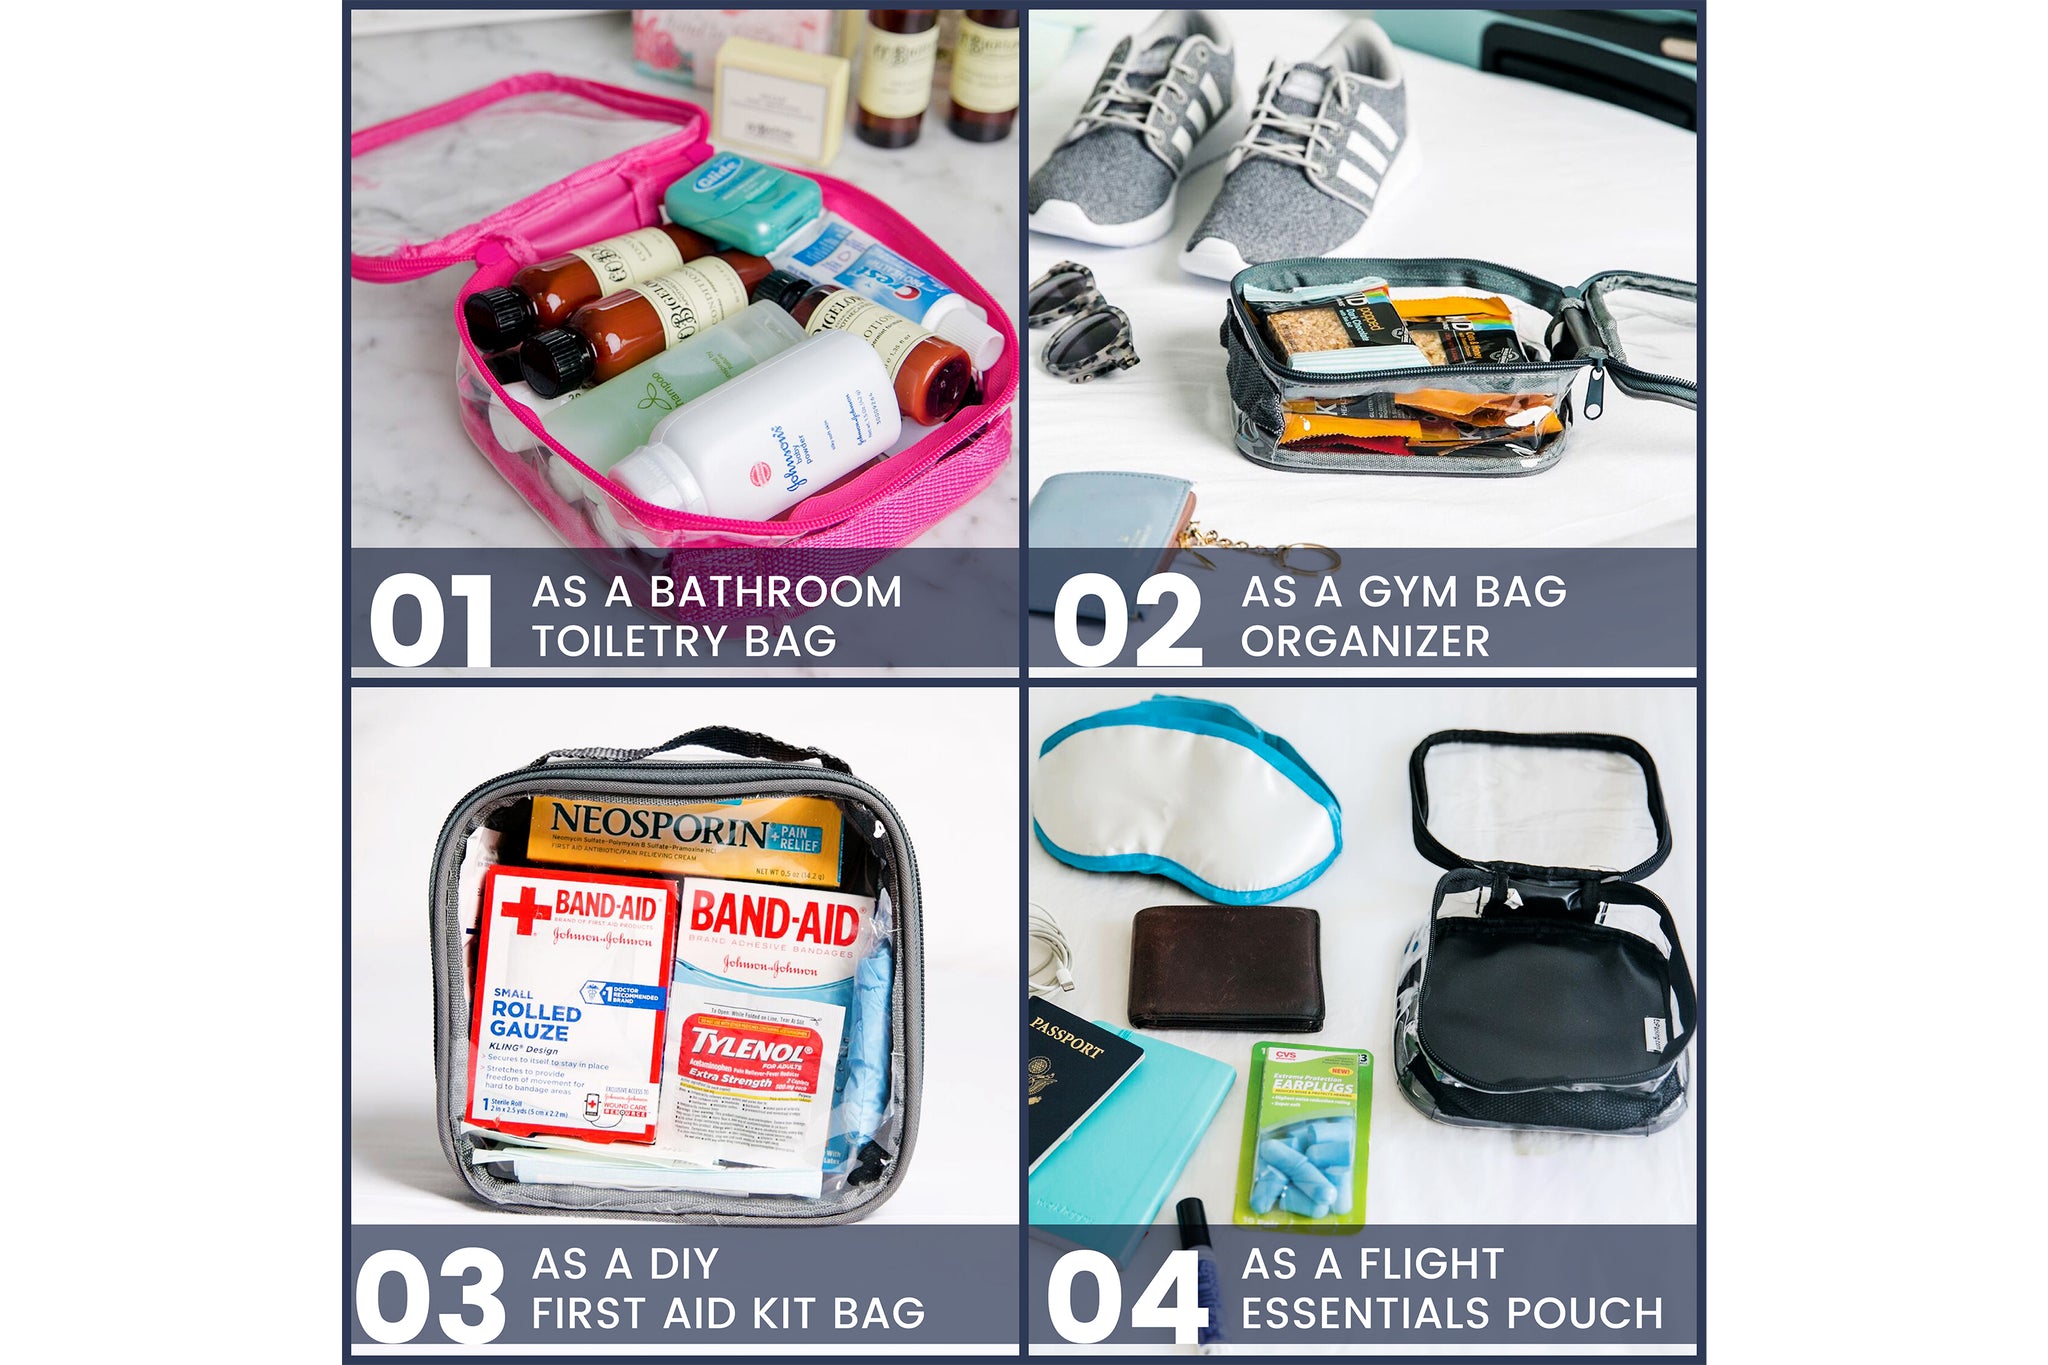 11 Reasons Toiletry Bags Are the Perfect Solution for Travel